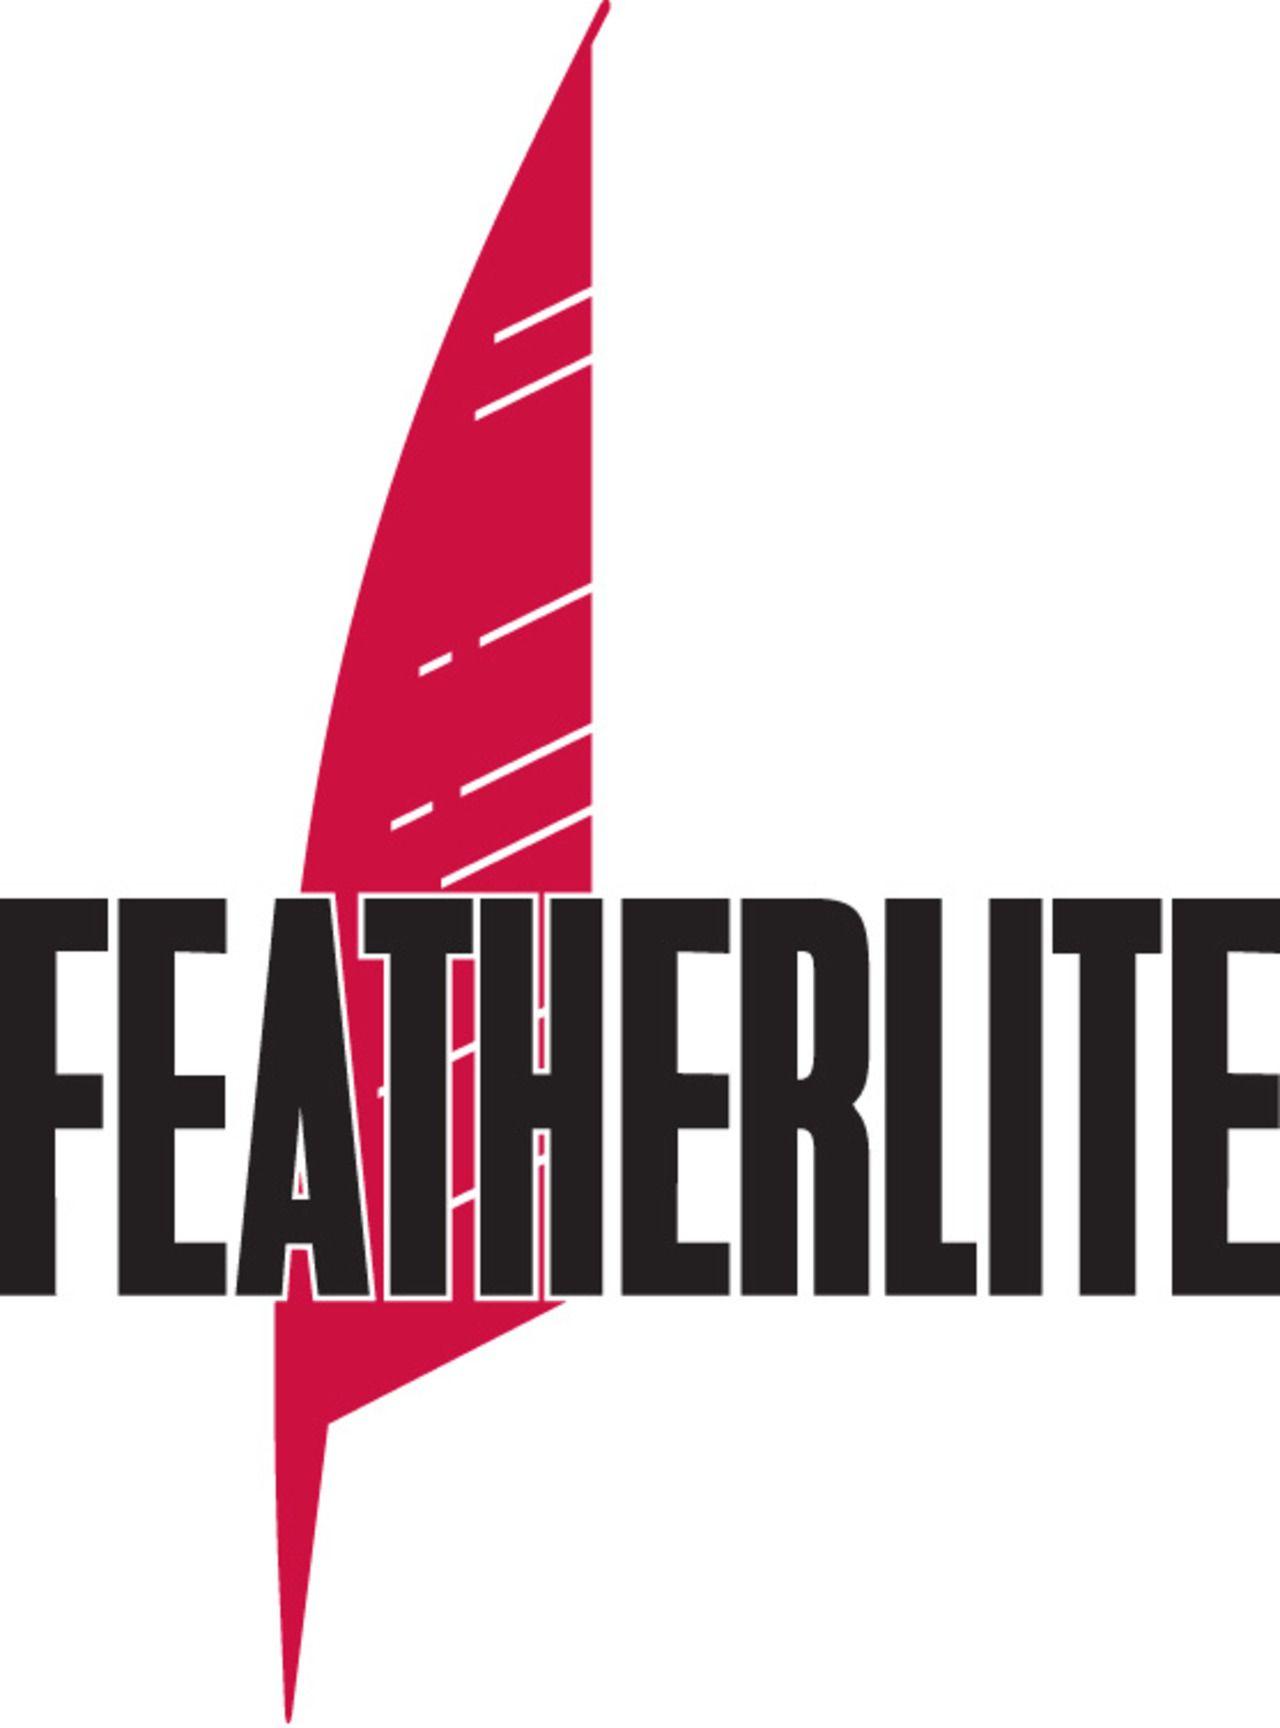 Featherlite Logo - Amerimix Broadens Reach with Geographic Expansion